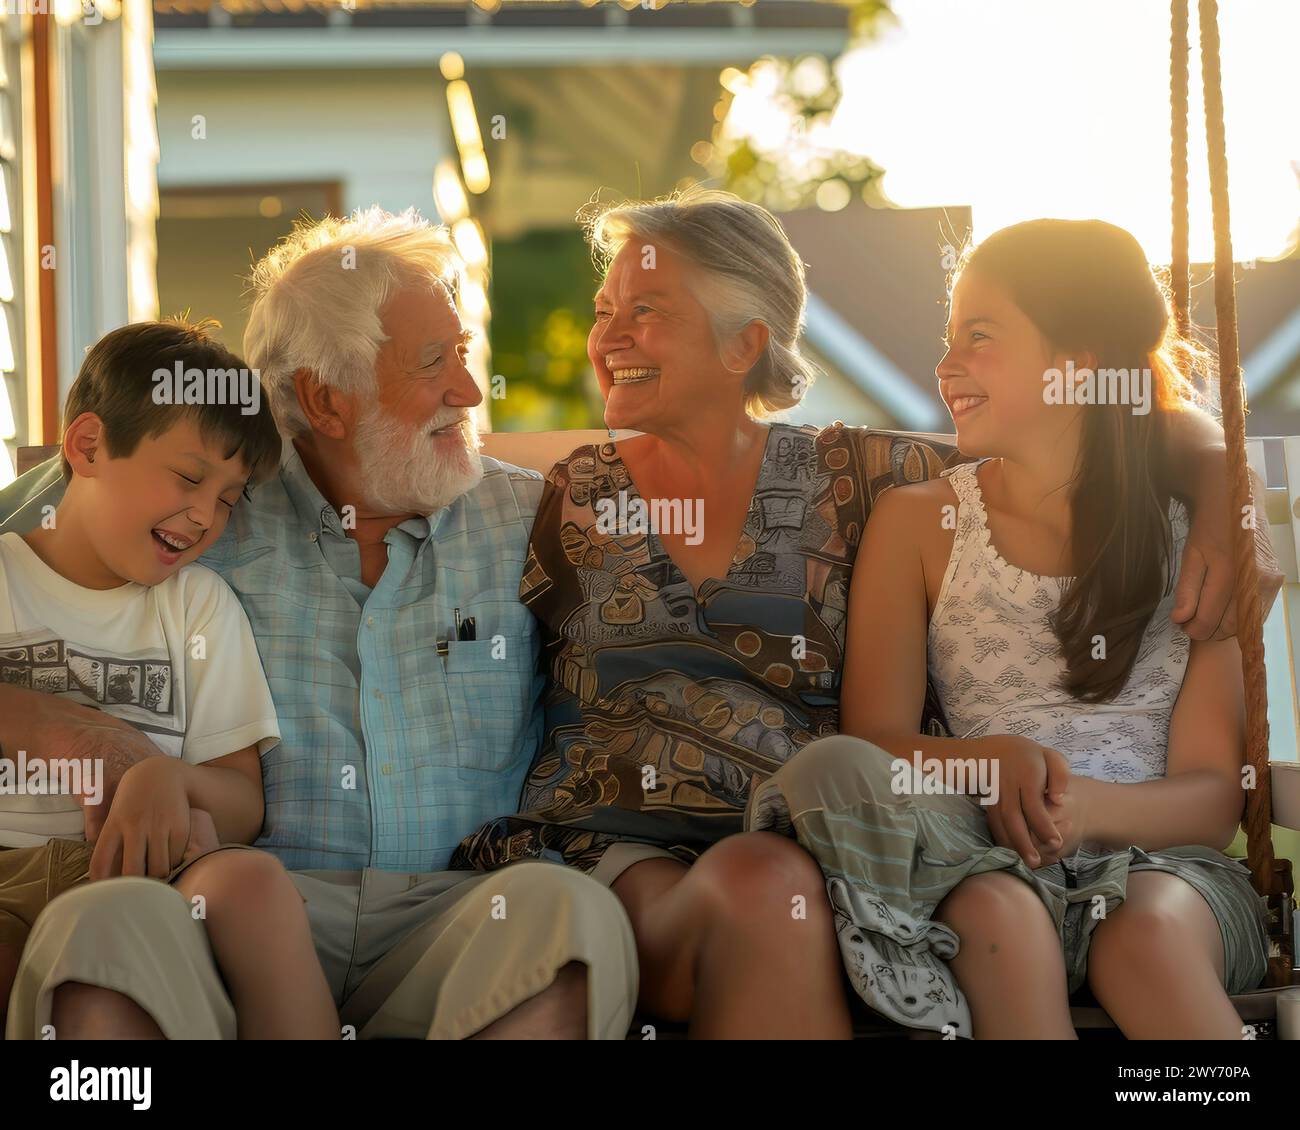 A family of four, including a grandfather and his grandchildren, are sitting on a swing and laughing together Stock Photo